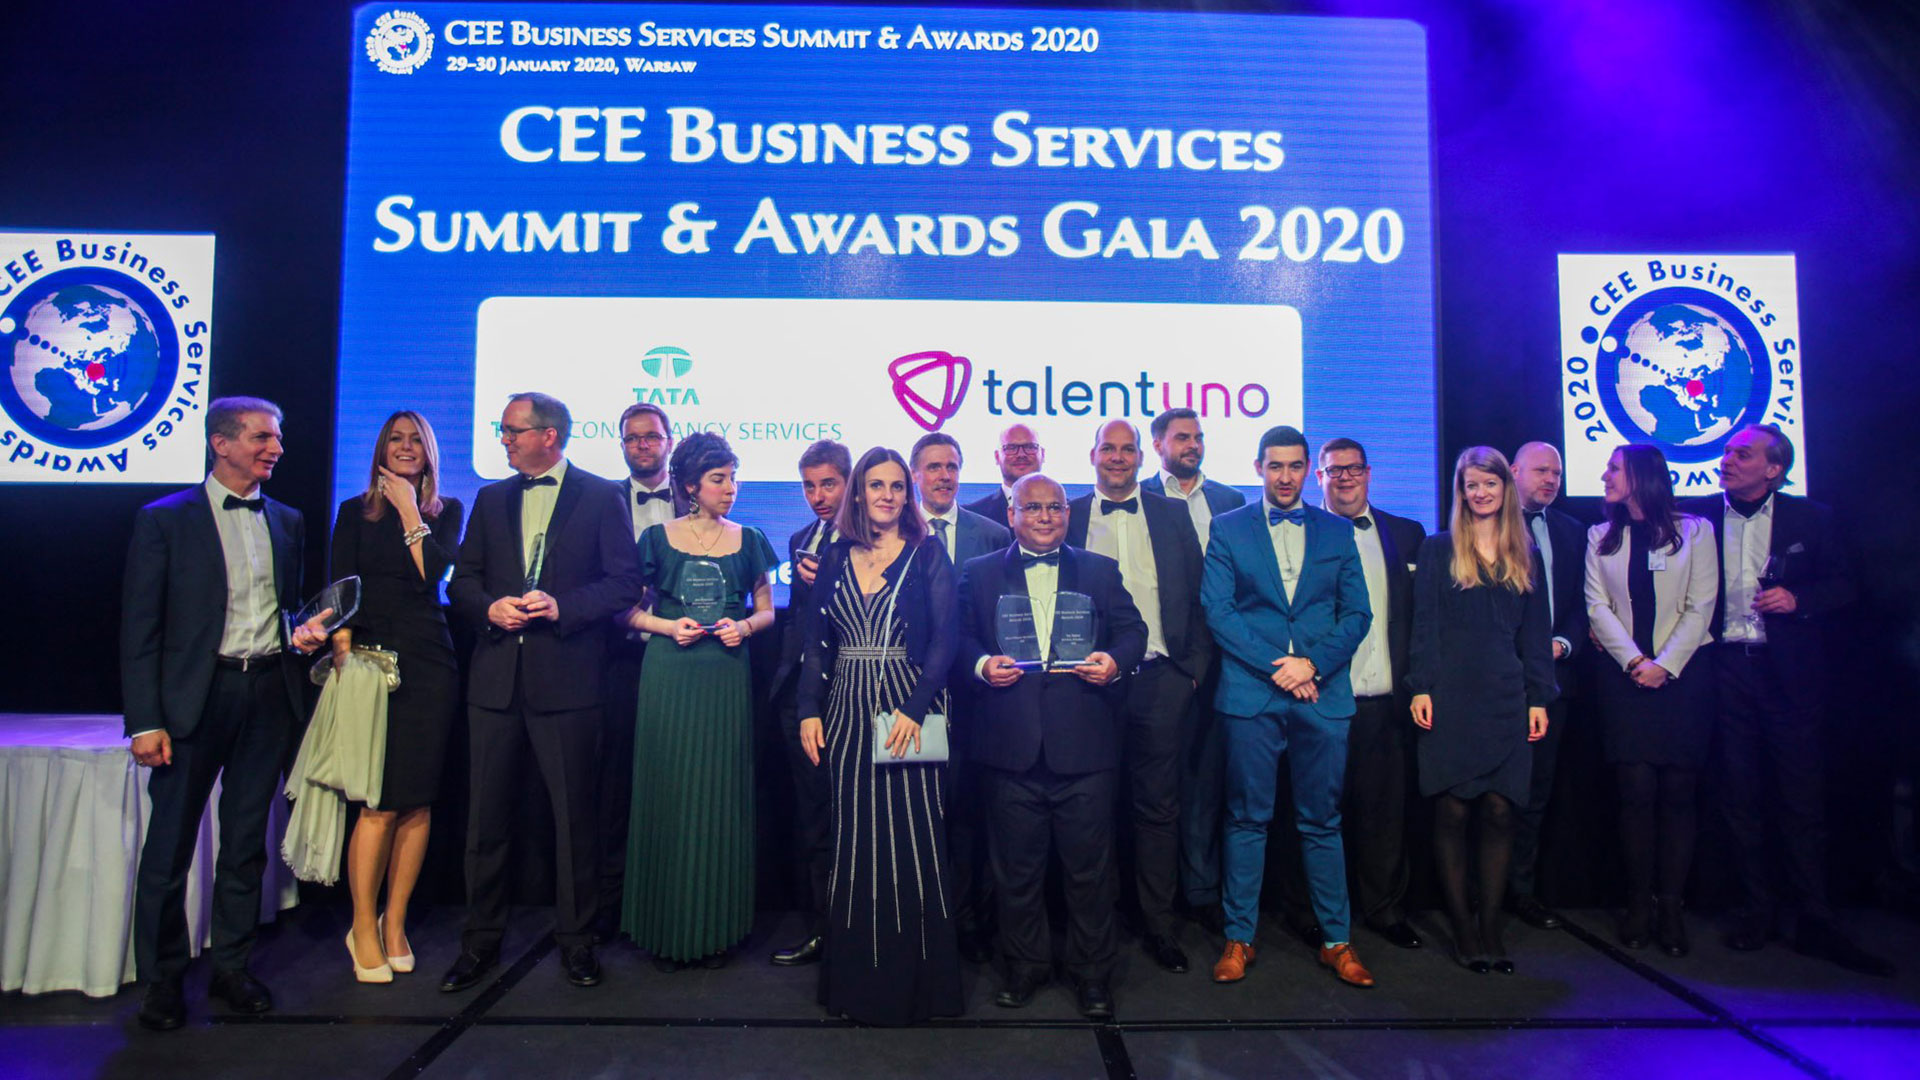 Hungarian Business Service Centres awarded in six categories at CEE Business Services Summit 2020